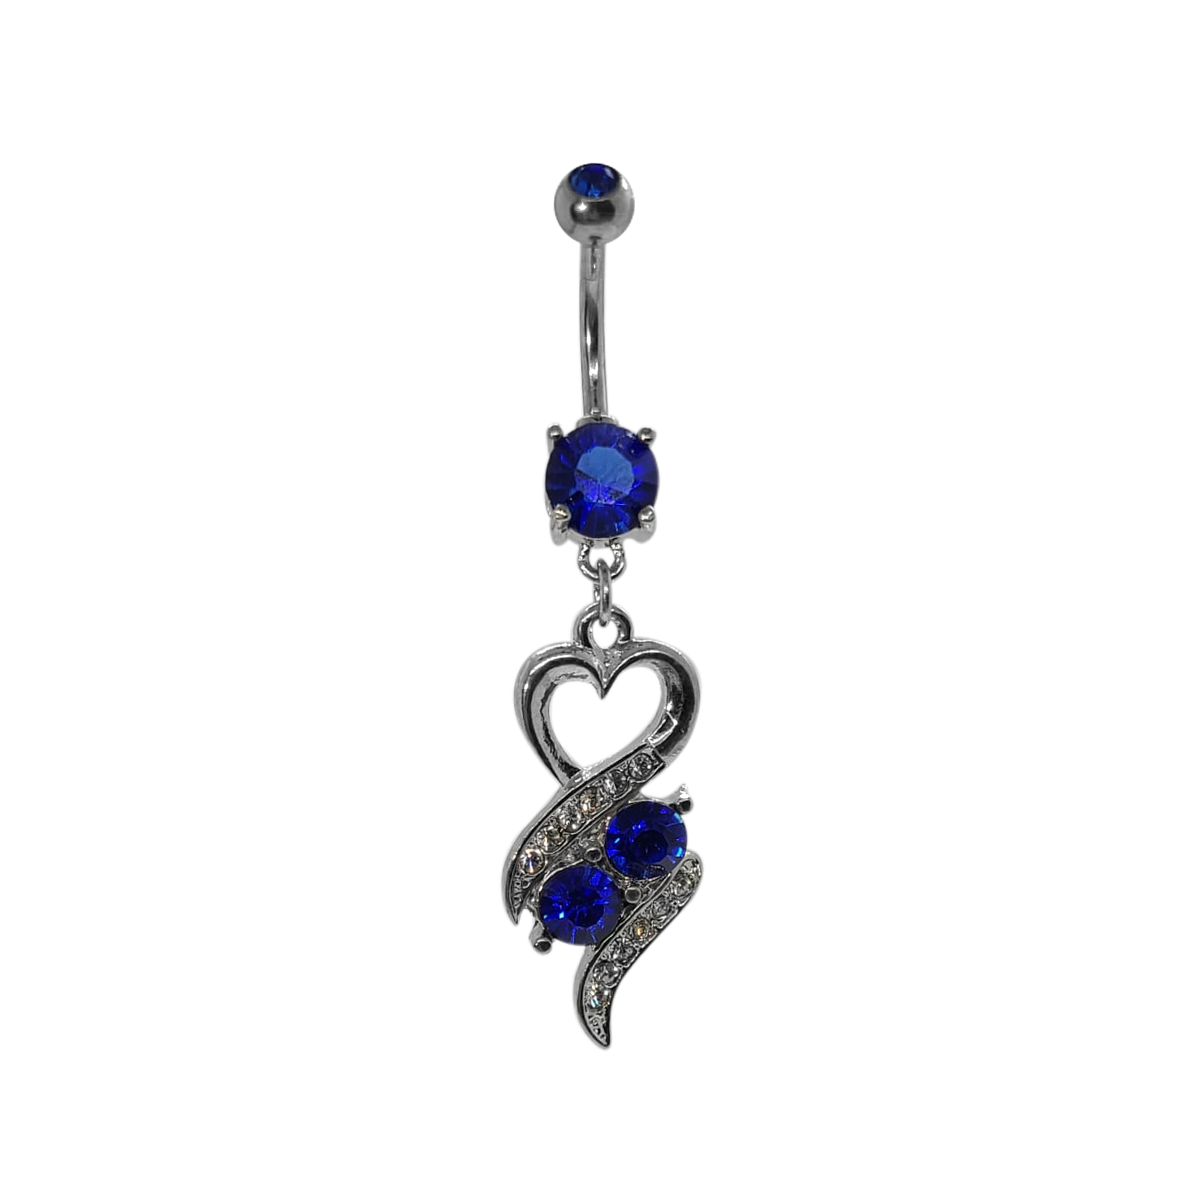 Heart Surgical Steel Dangle Belly Button Ring with CZ Jewels 14g 7/16" - 11mm